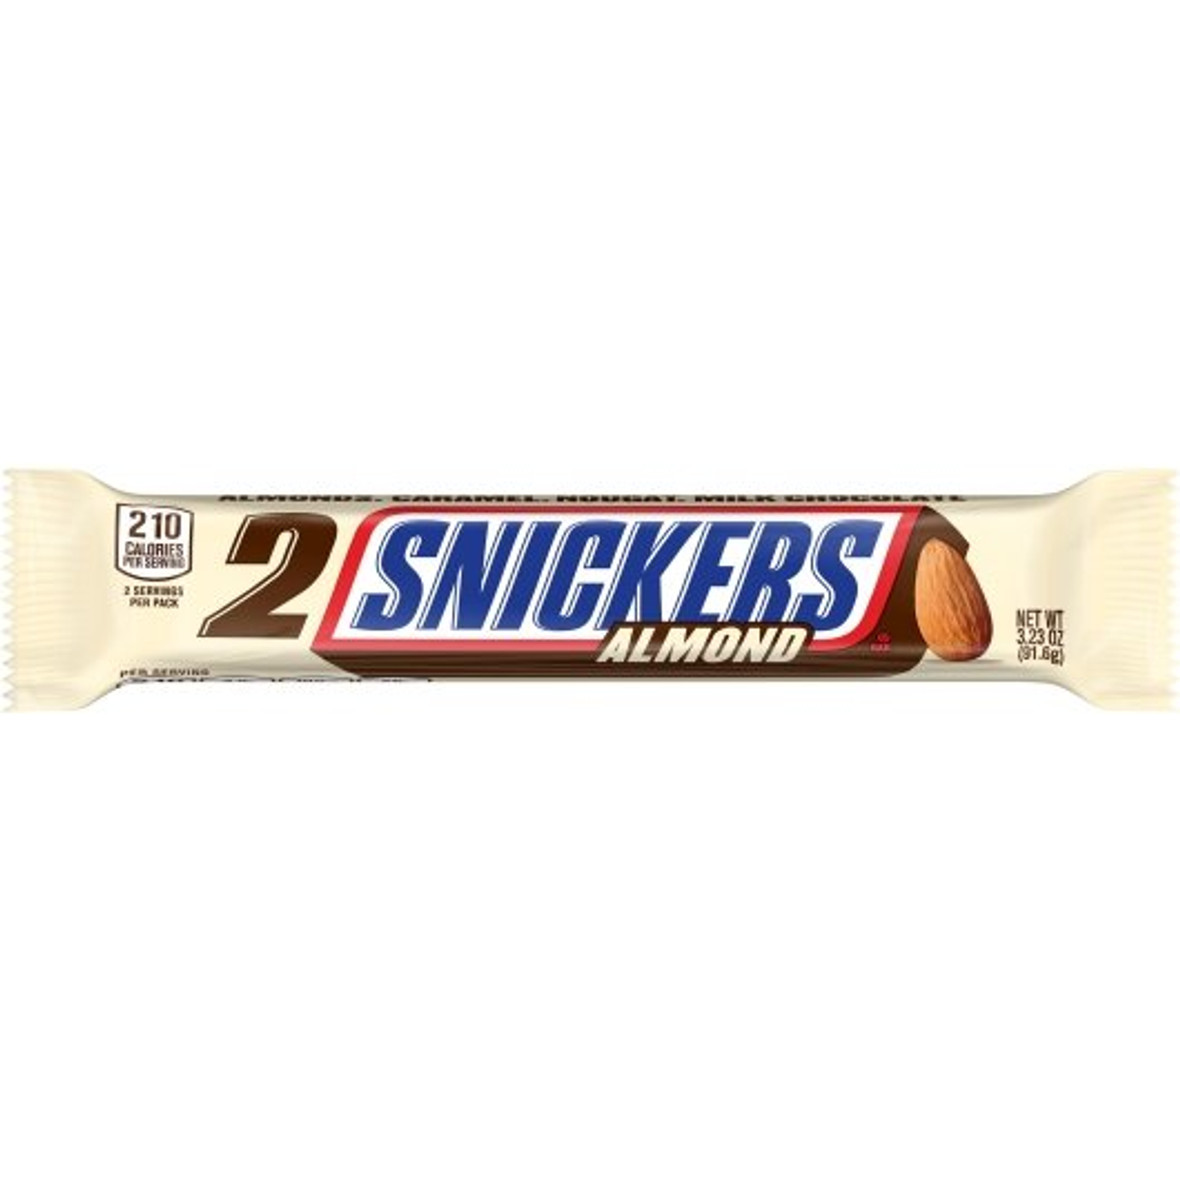 Snickers King Size Almond Chocolate Candy Bar, 3.23 Ounce, 24 Per Box, 6 Per Case